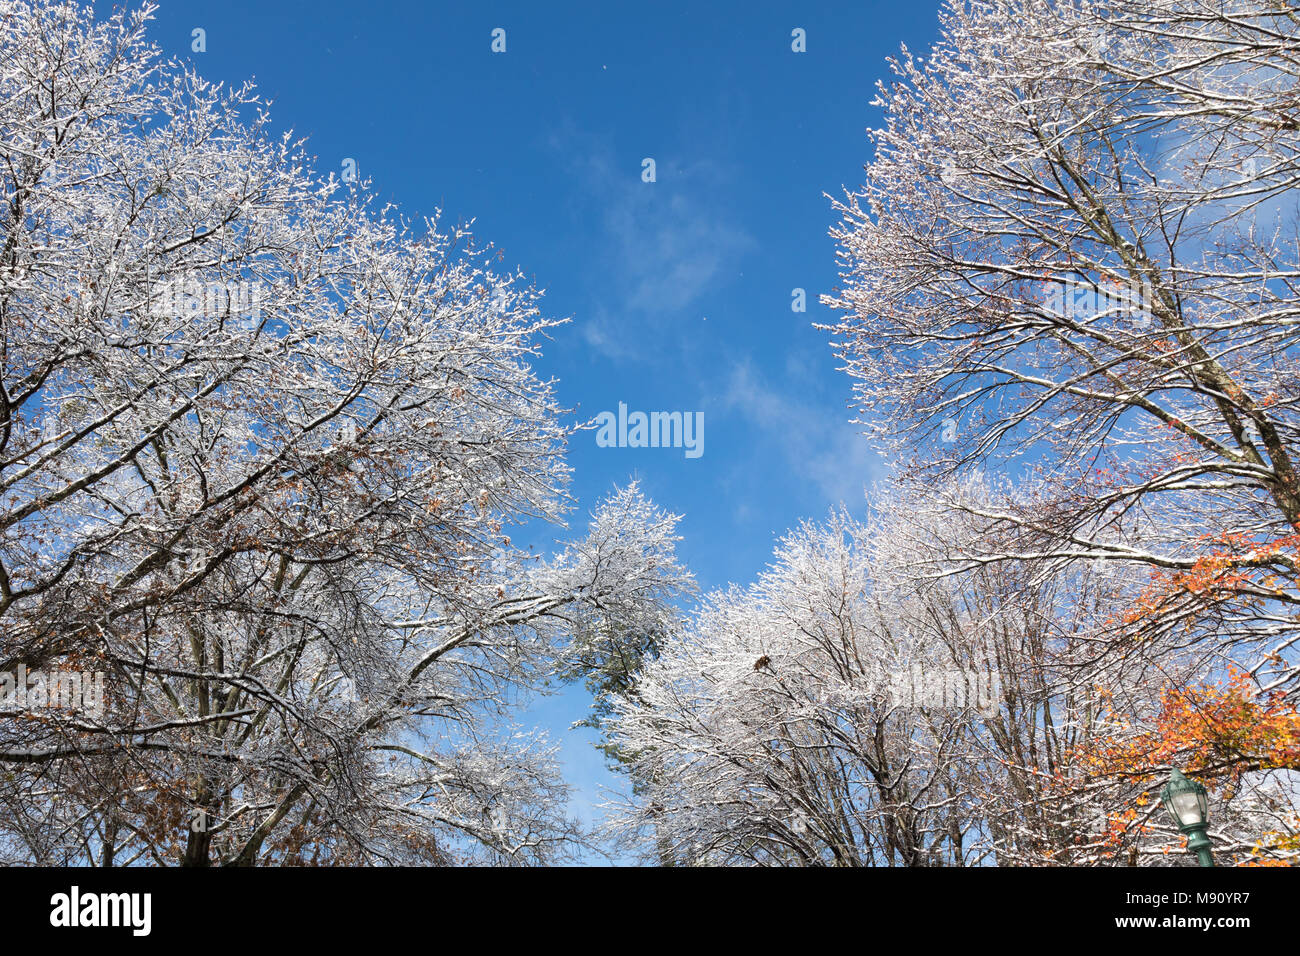 Snow filled trees after a snowfall. Stock Photo